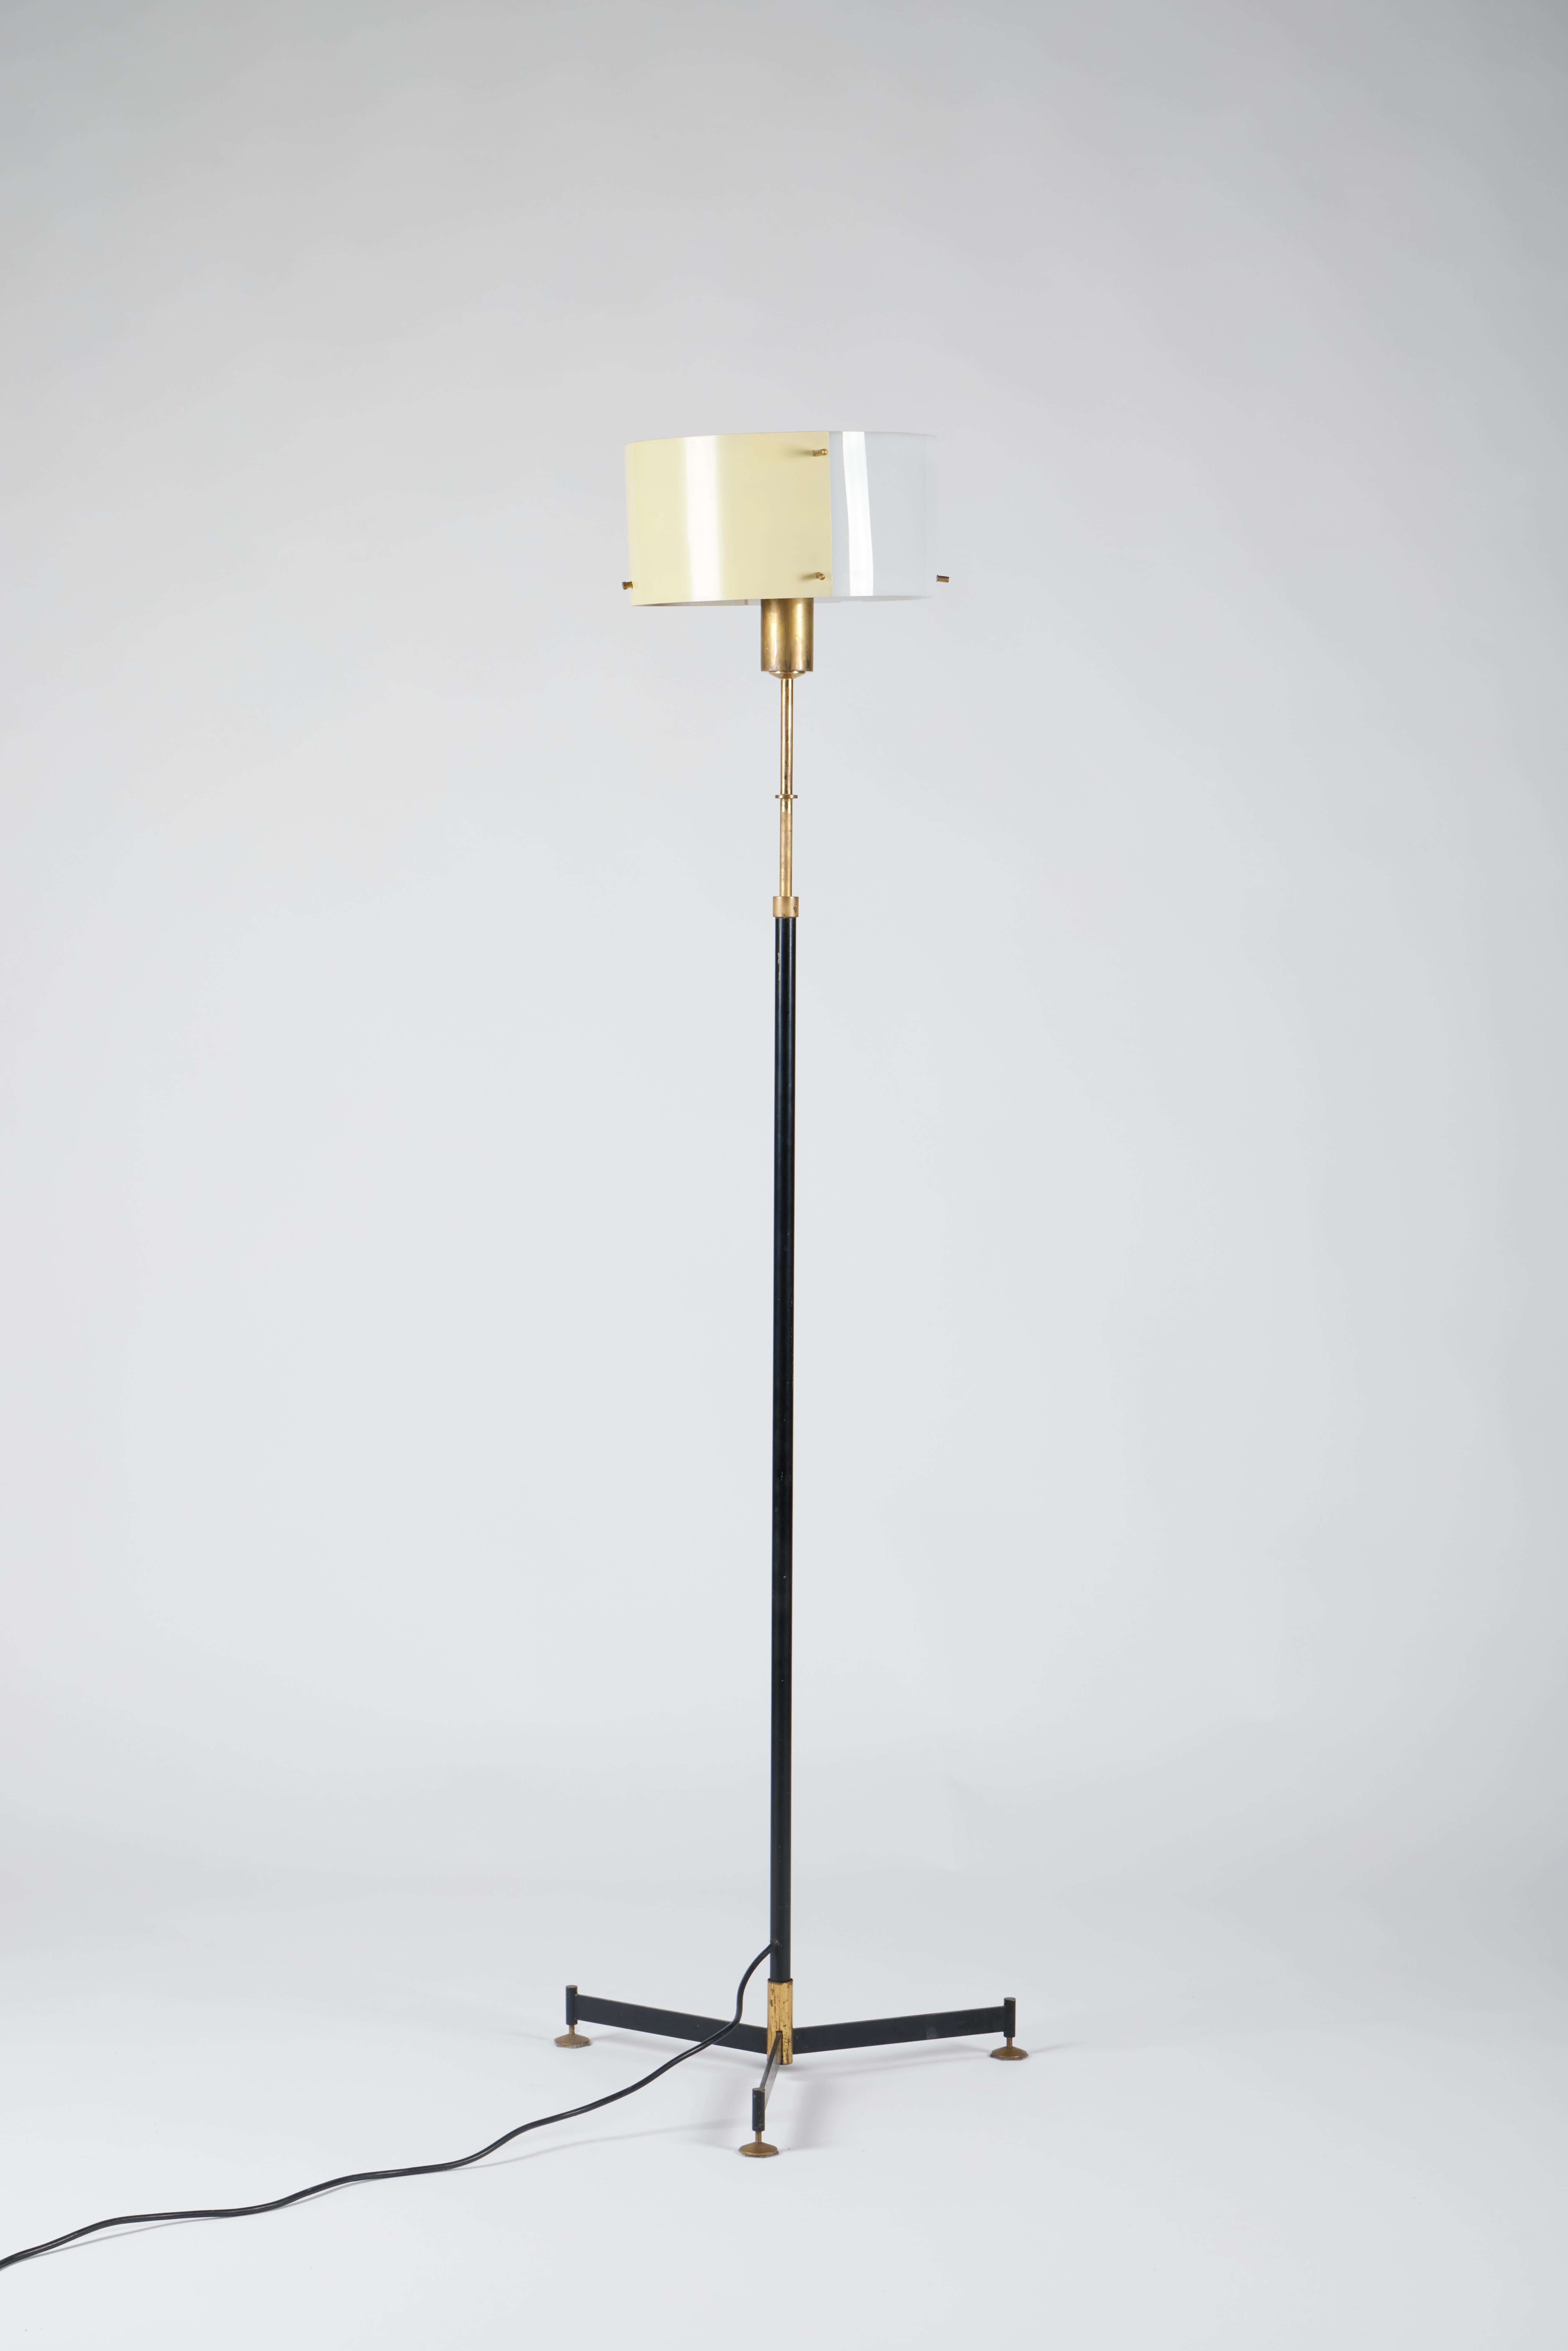 Metal Italian Mid-Century, Modern Floor Lamp with Adjustable Height by Stilnovo, 1950s For Sale